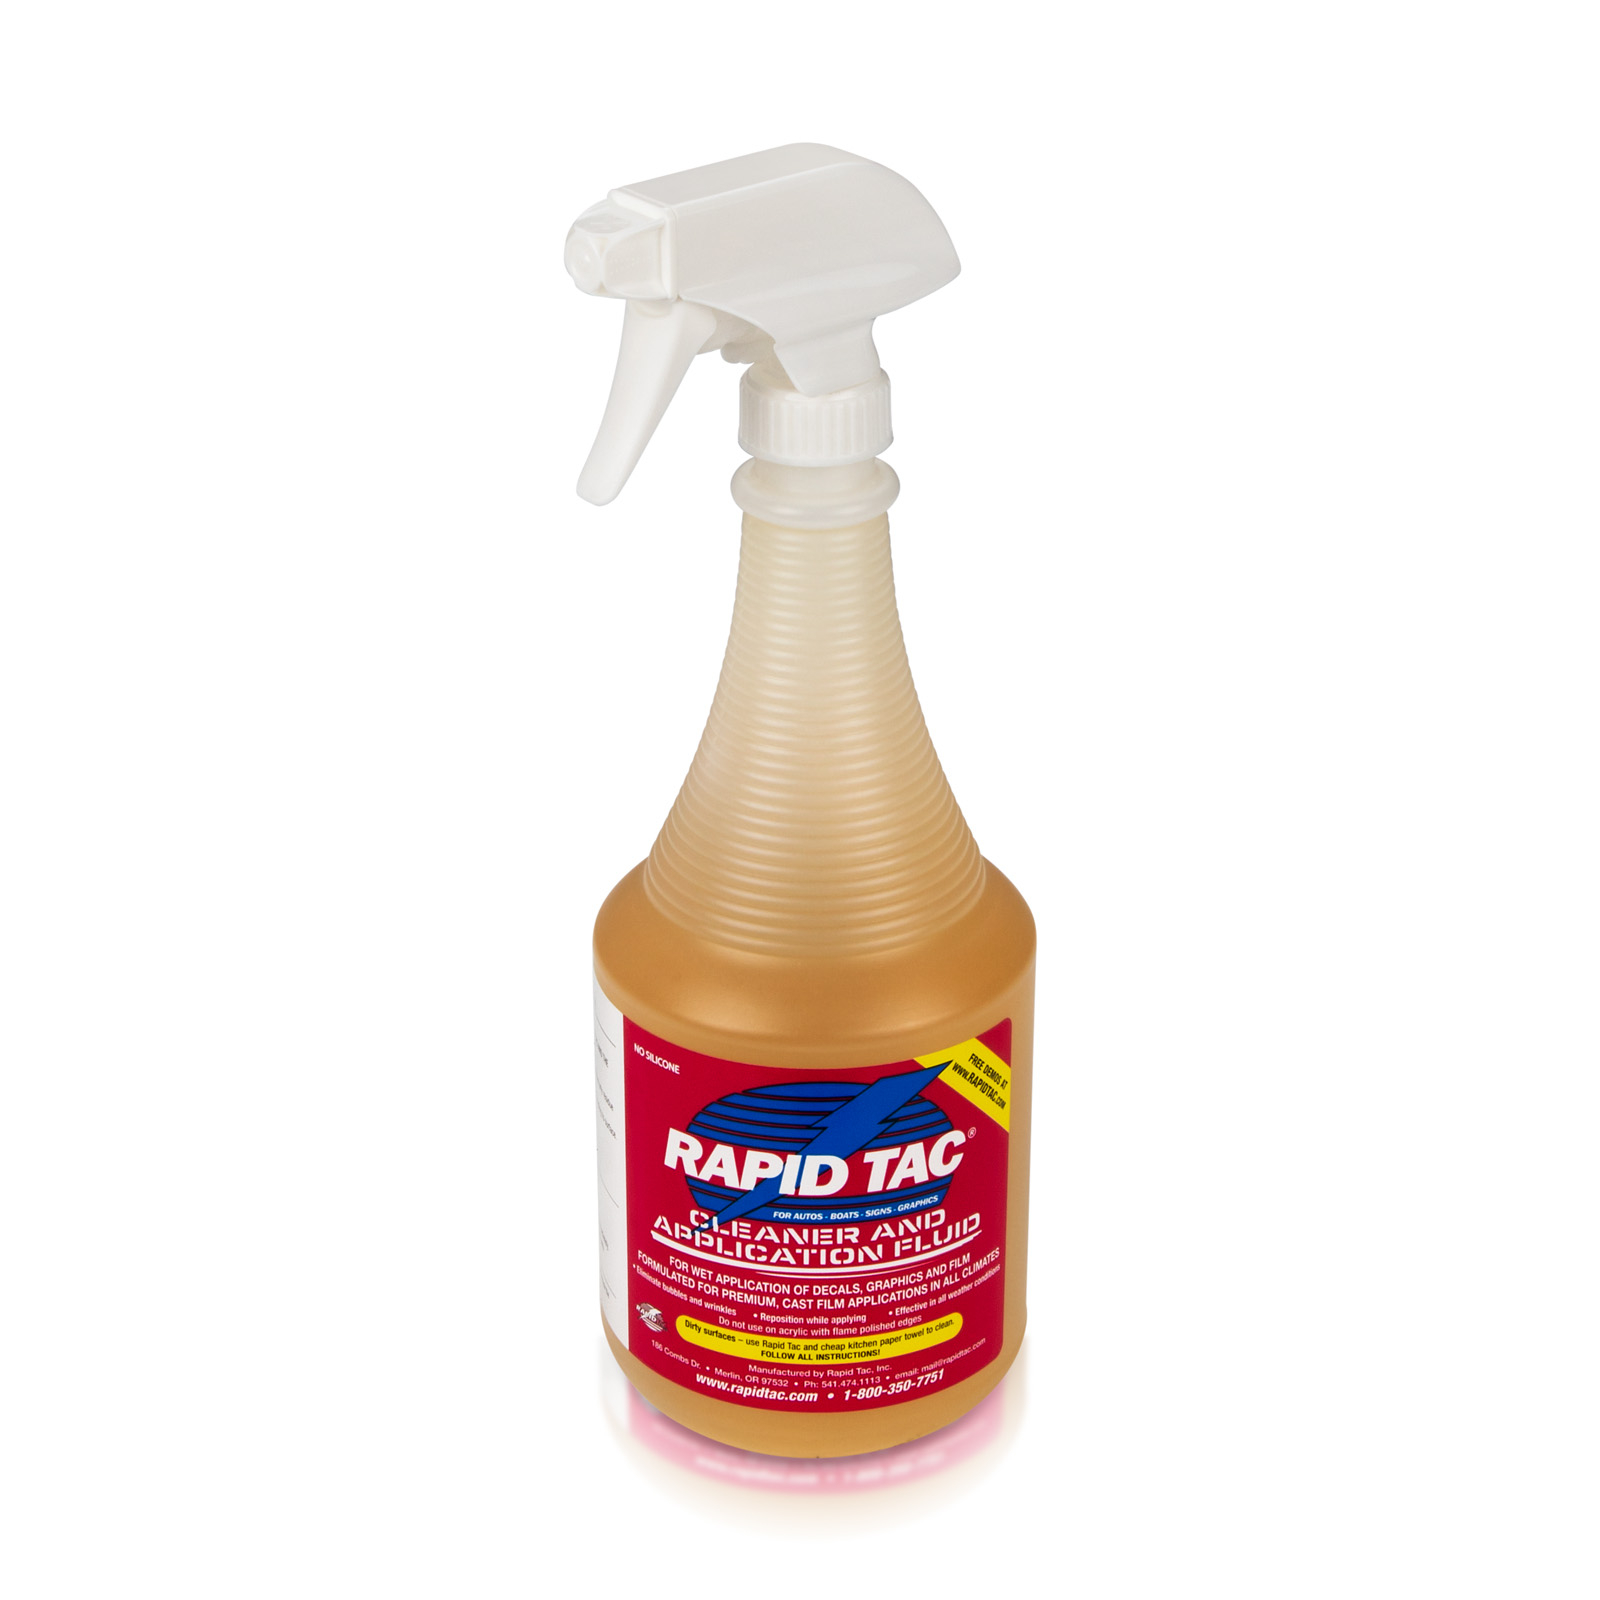 Rapid Tac Rapid Remover, No Mess or Damage Adhesive Remover, 4oz Spray  Bottle